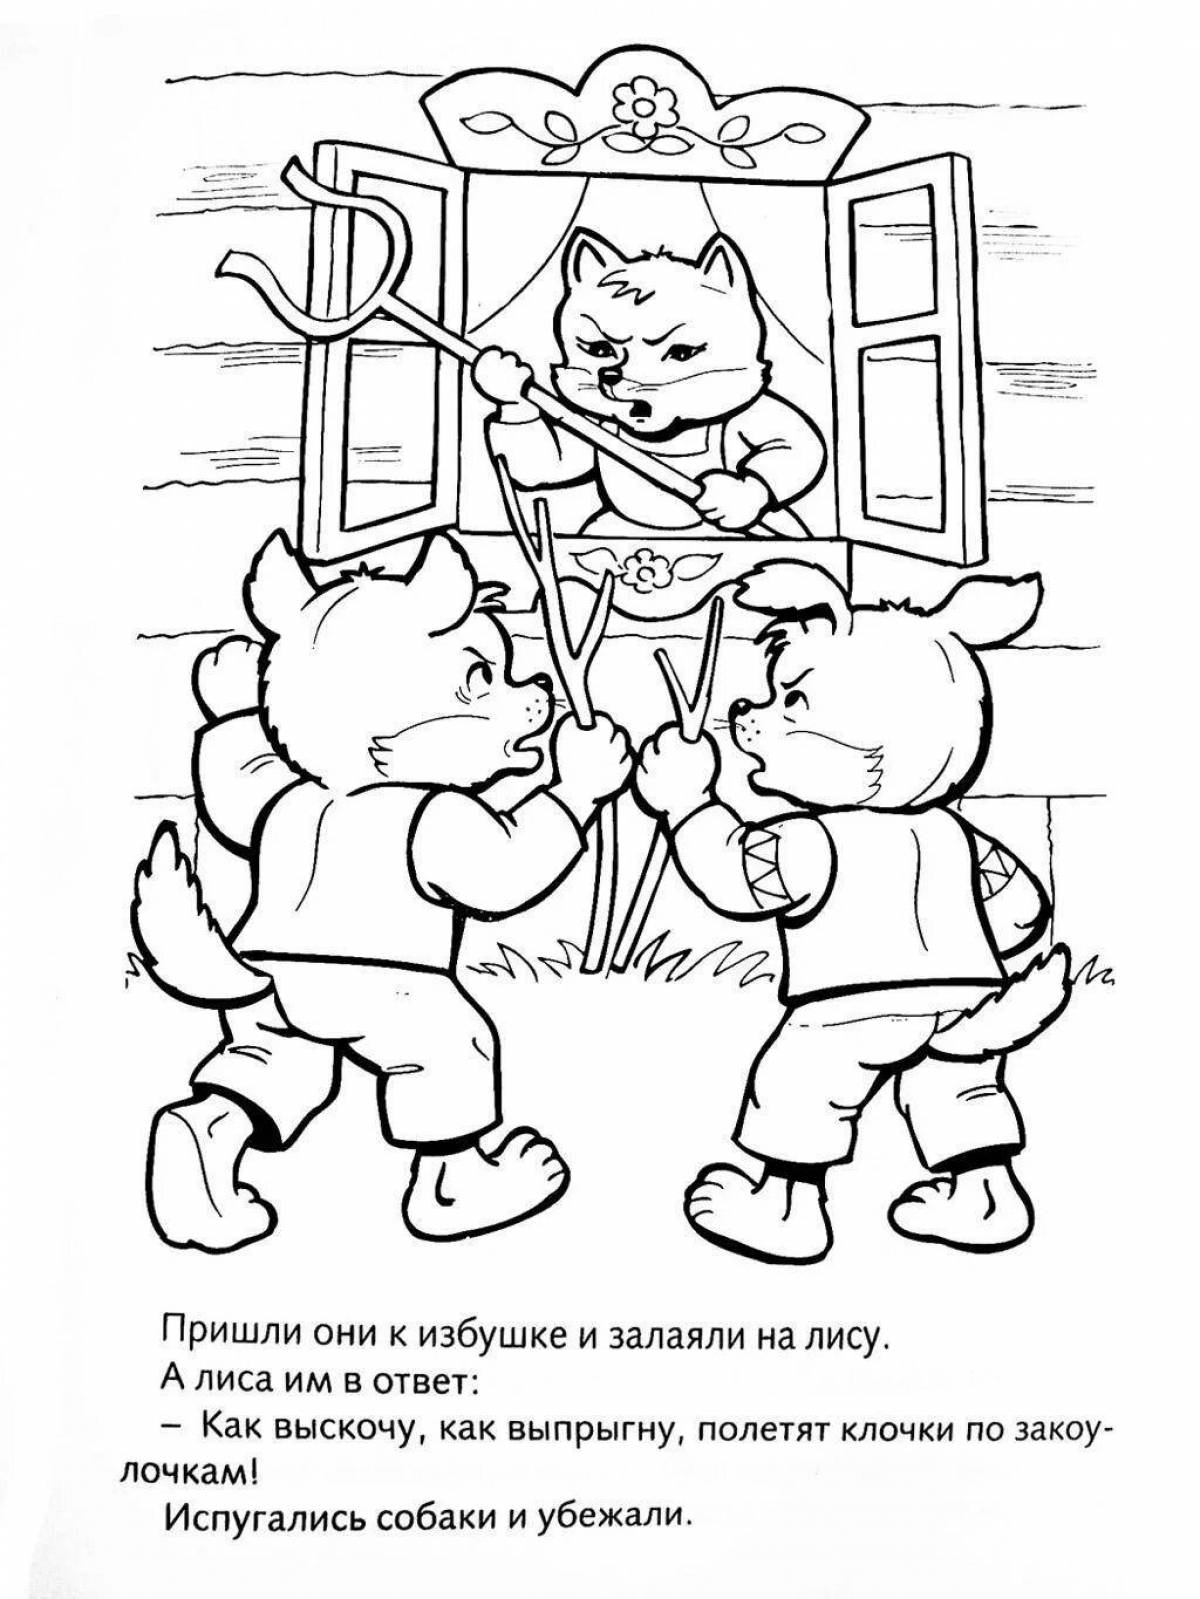 Awesome fox and hare coloring pages for kids